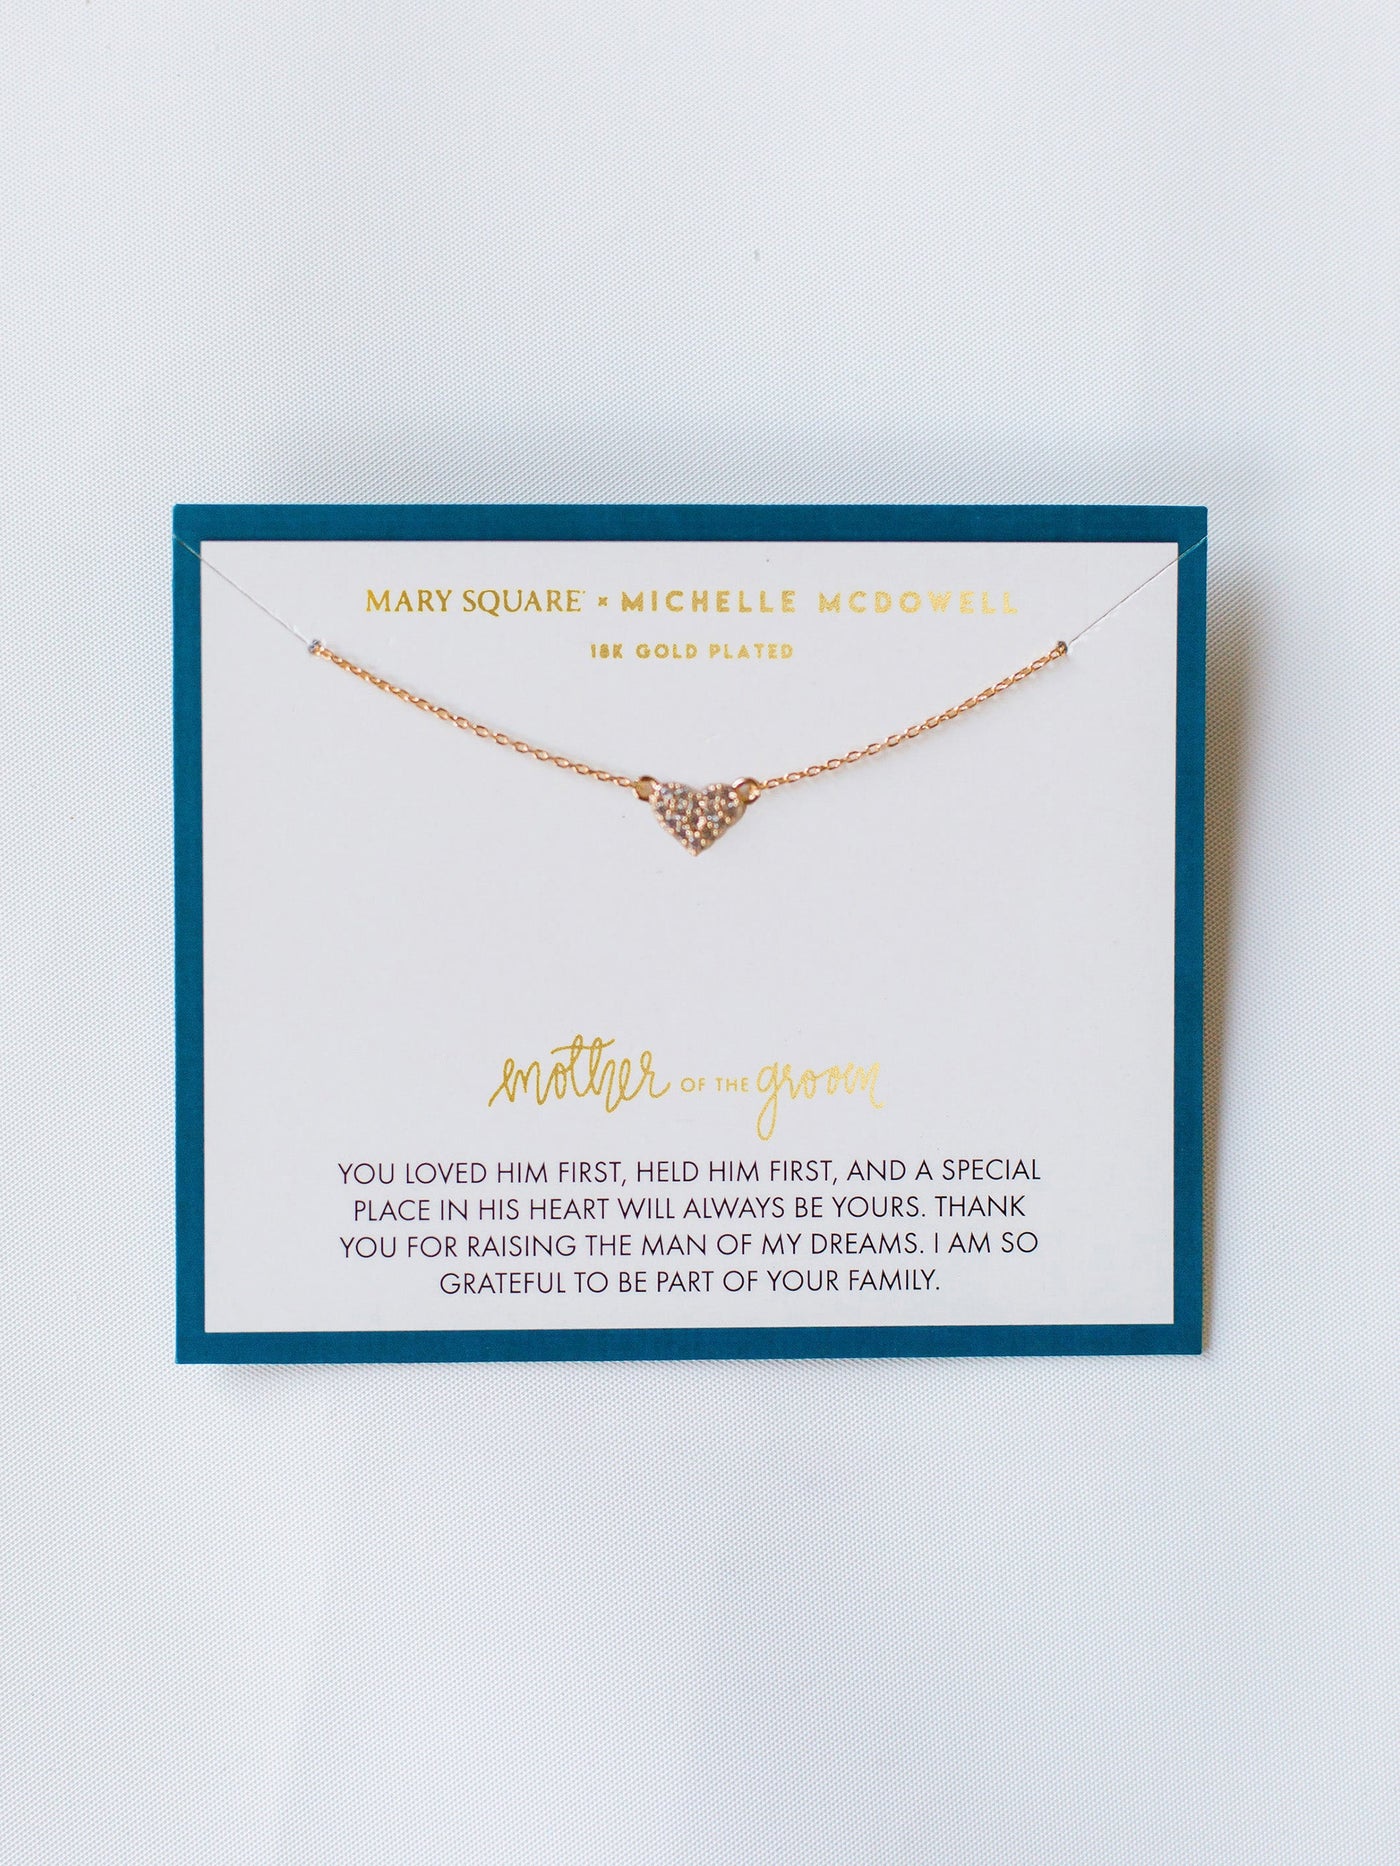 Mother of the Groom Necklace - Mary Square, LLC